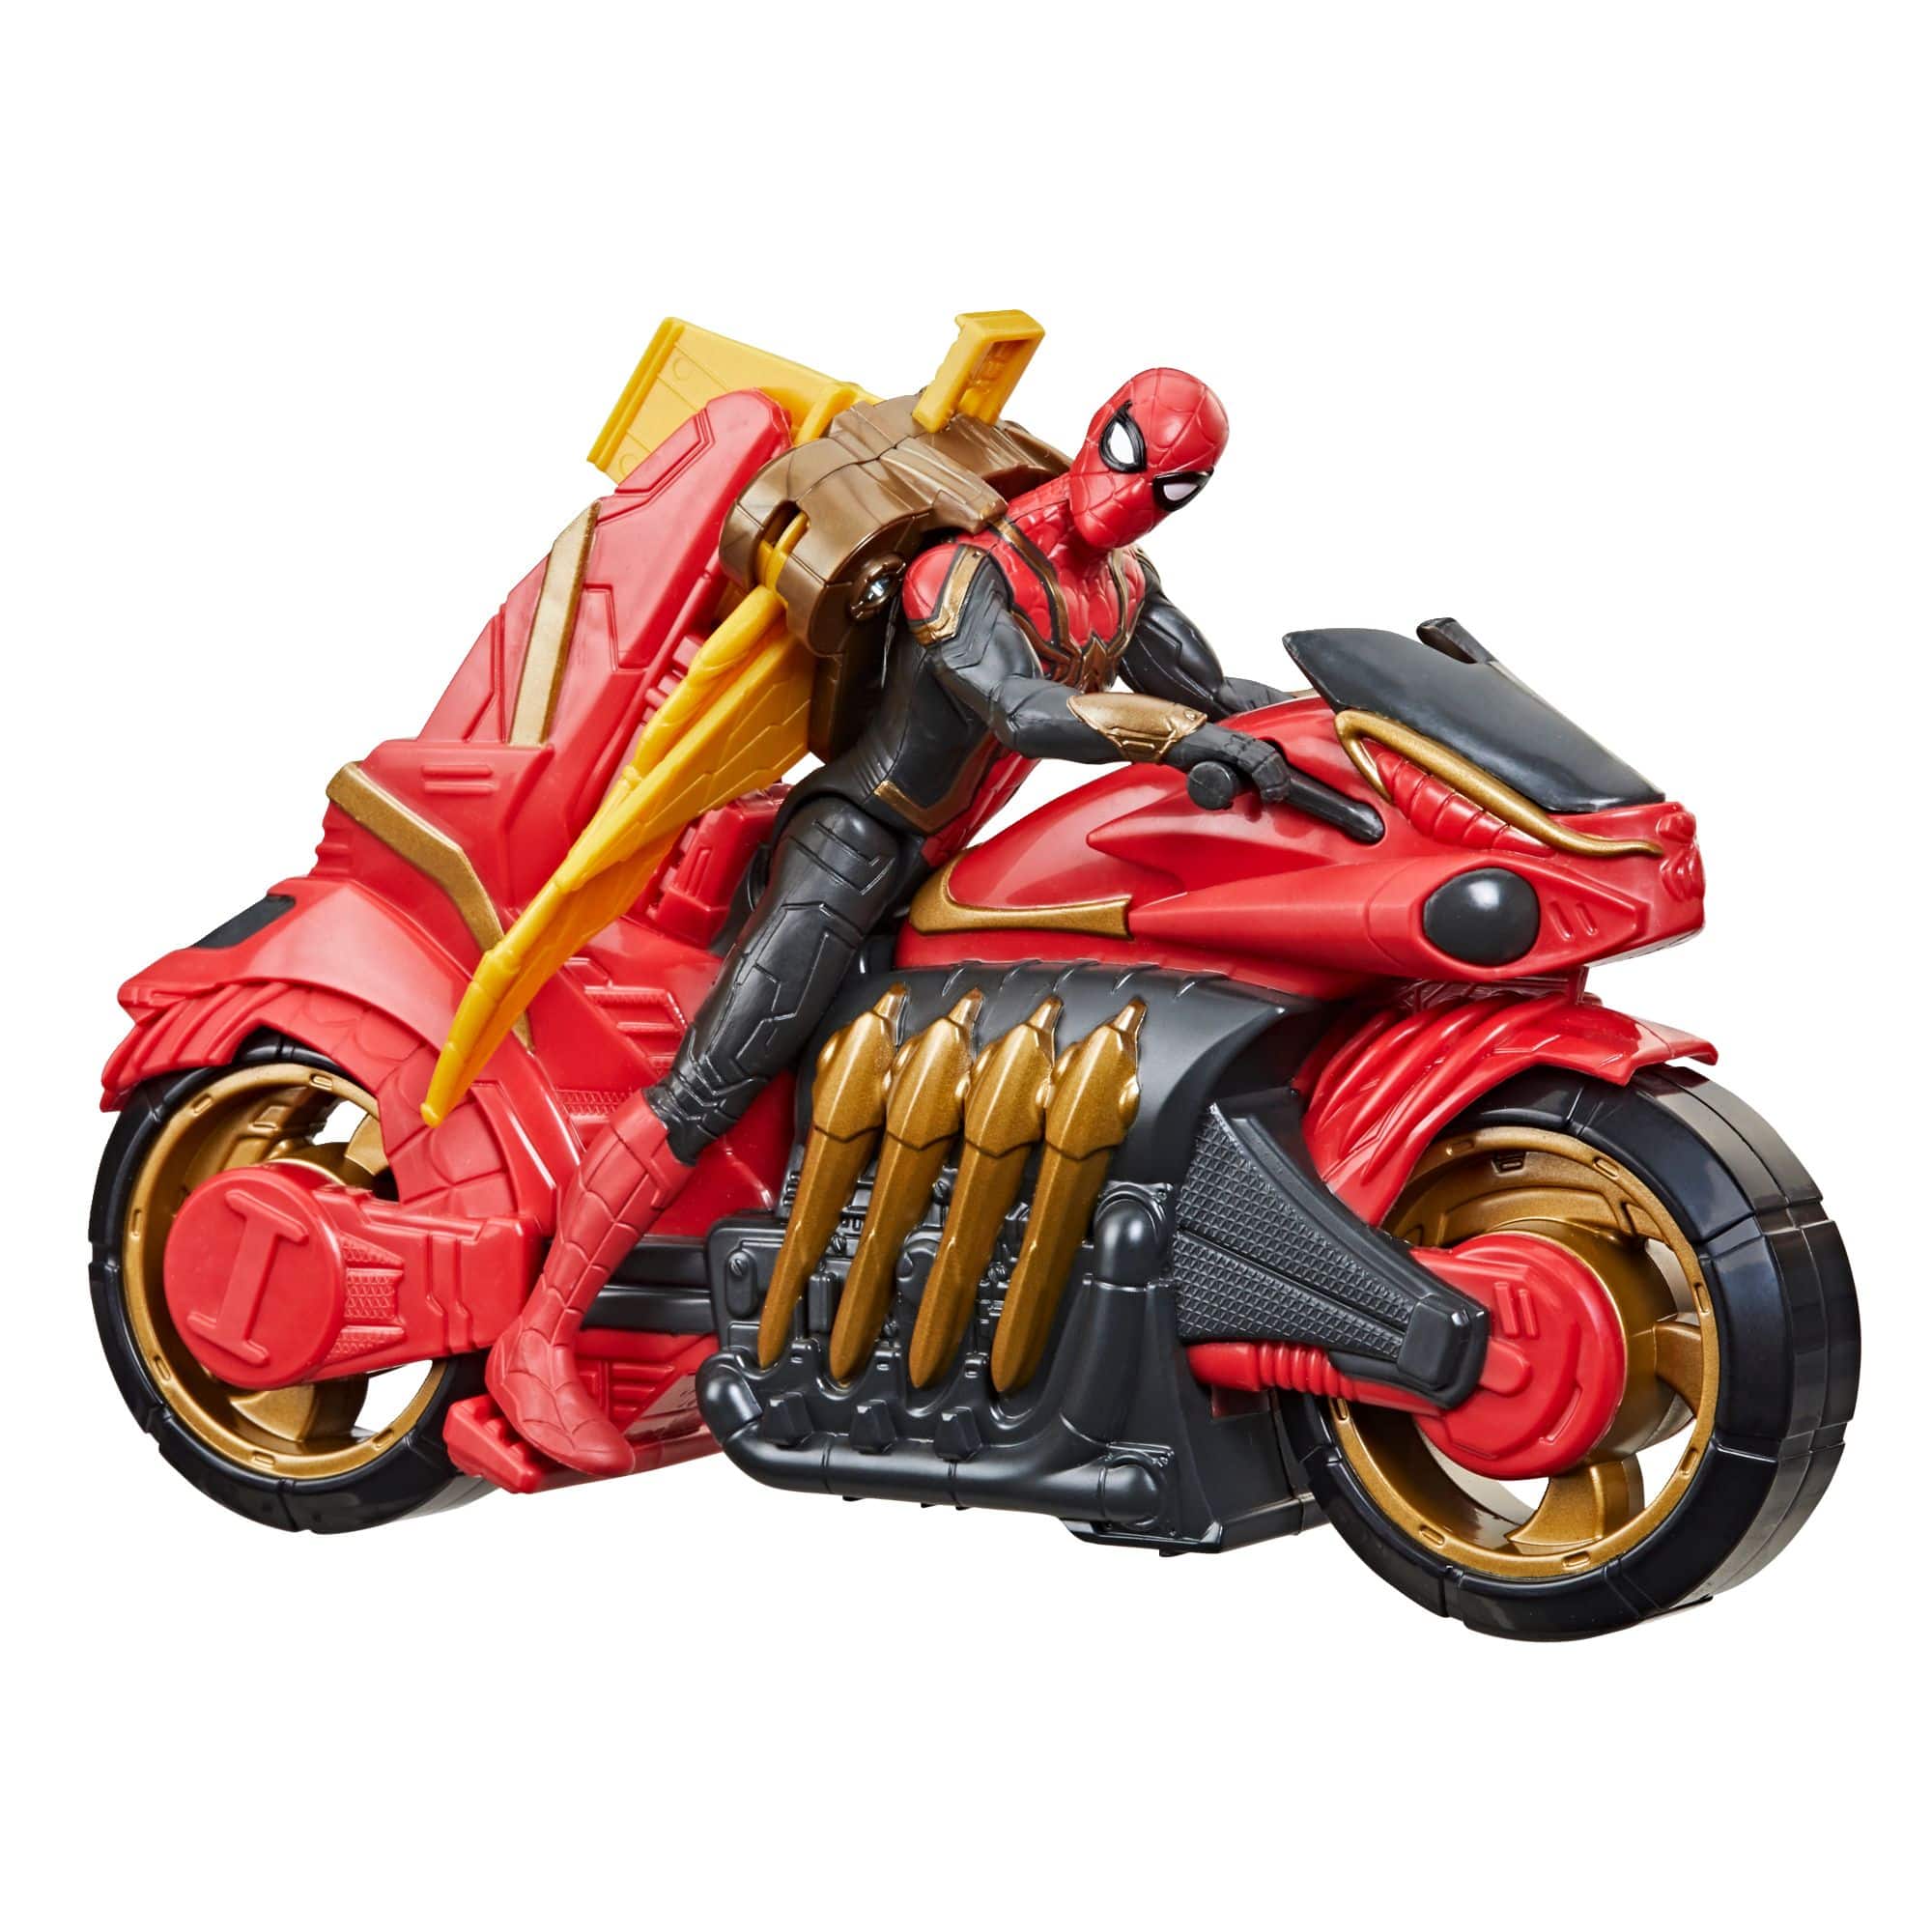 Marvel Spiderman Motorcycle Action Figure Brand New